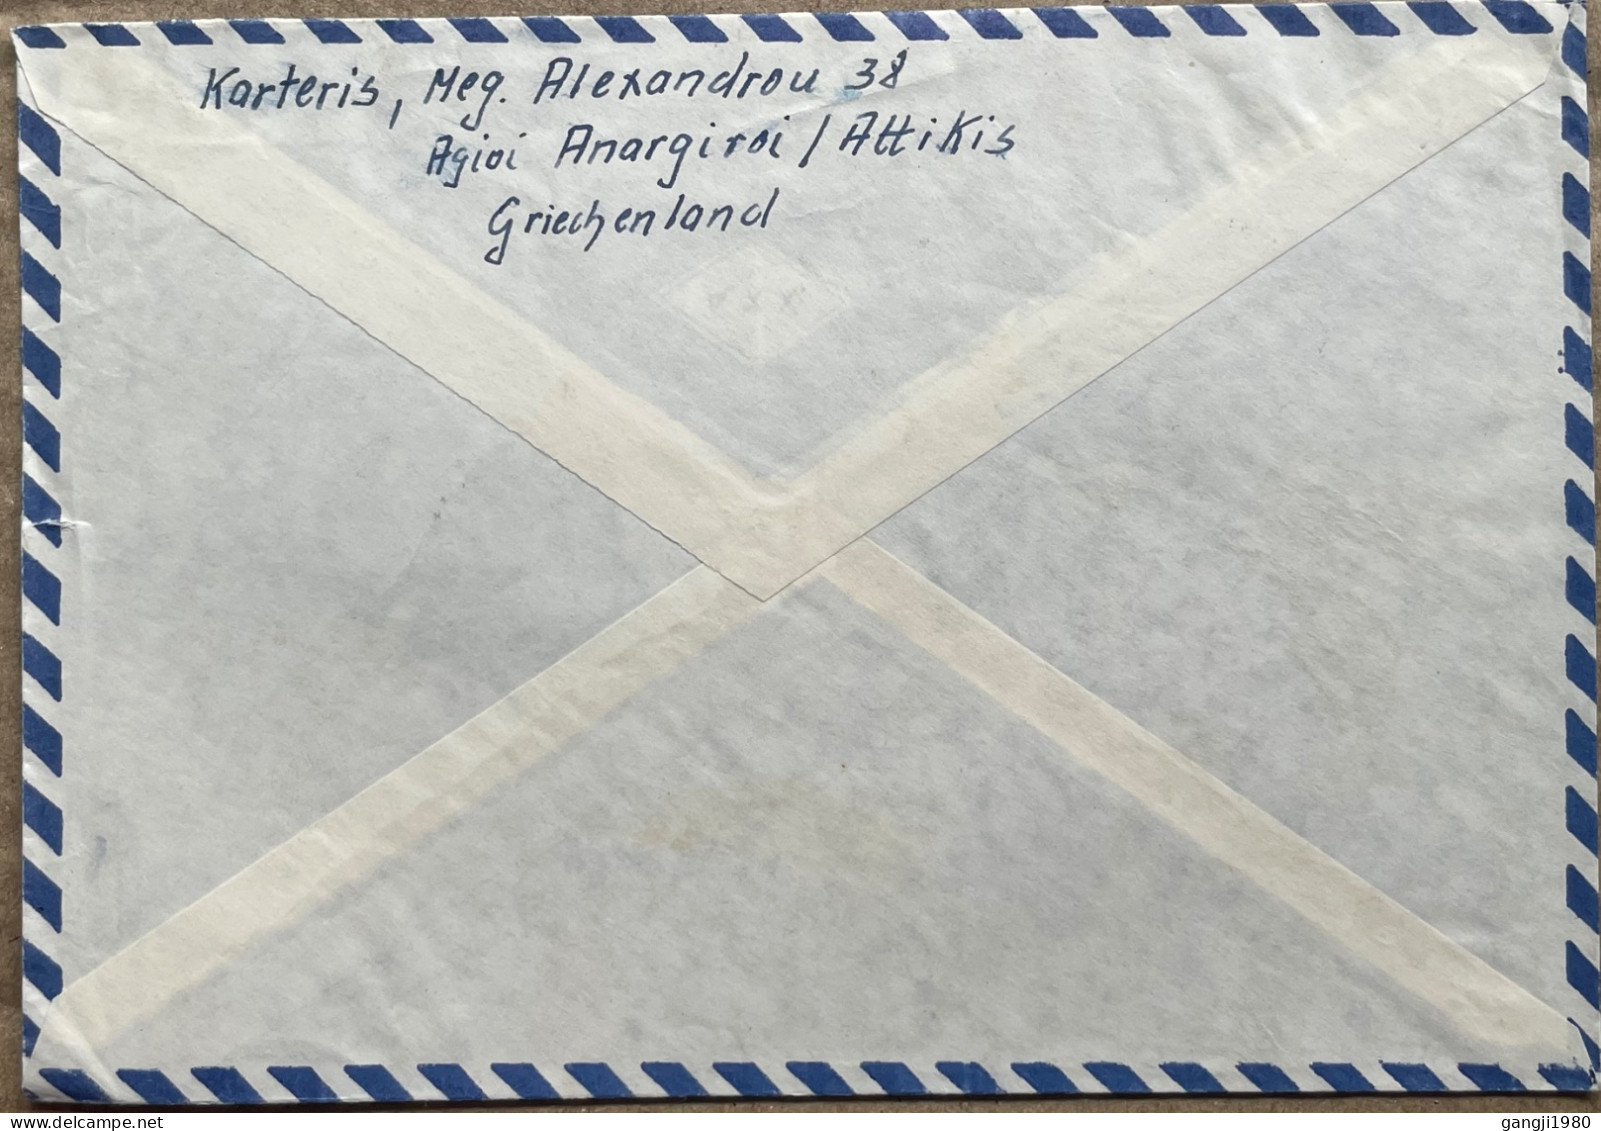 GREECE 1968, COVER USED TO GERMANY, BOXED RETURN FOR PAYMENT OF RE MAILING, 3 DIFF STAMP, RHODE MONUMENT, AIR FORCE AIRC - Briefe U. Dokumente